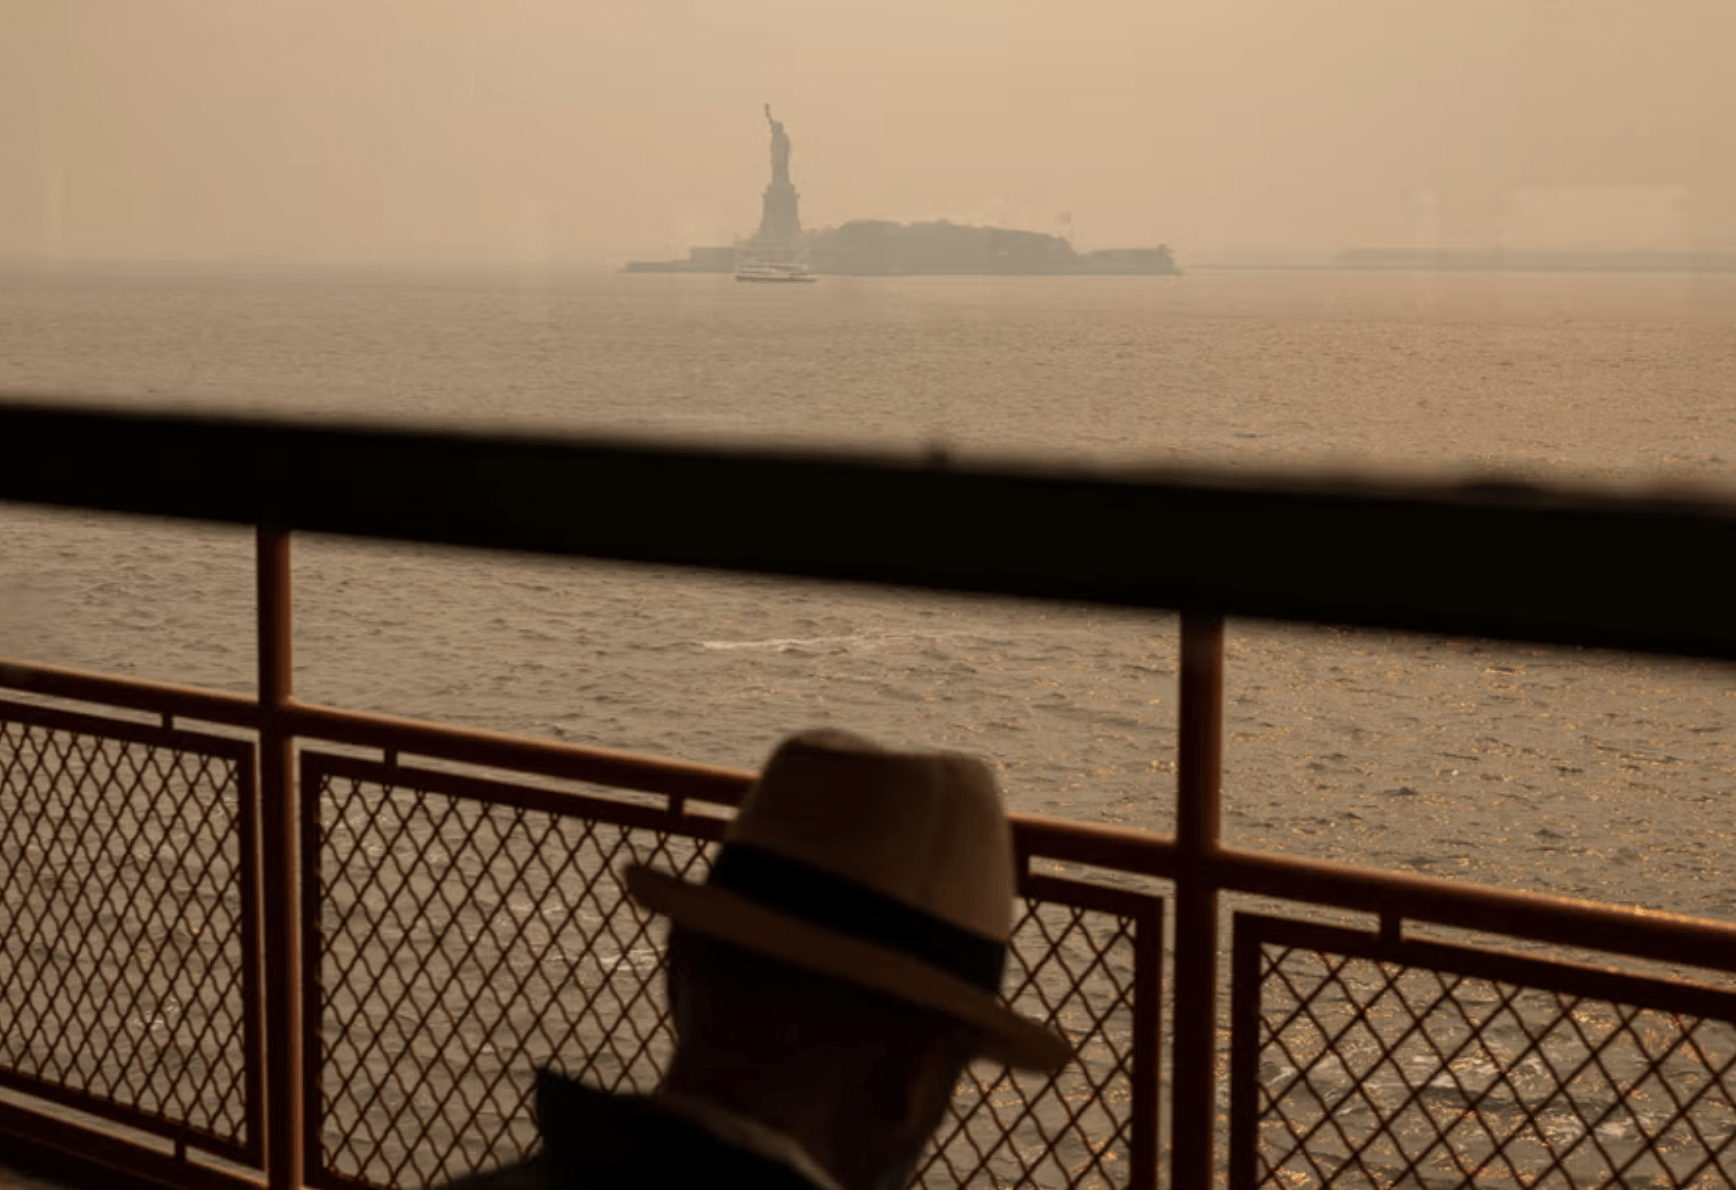 Hazy skies prevail above the Statue of Liberty